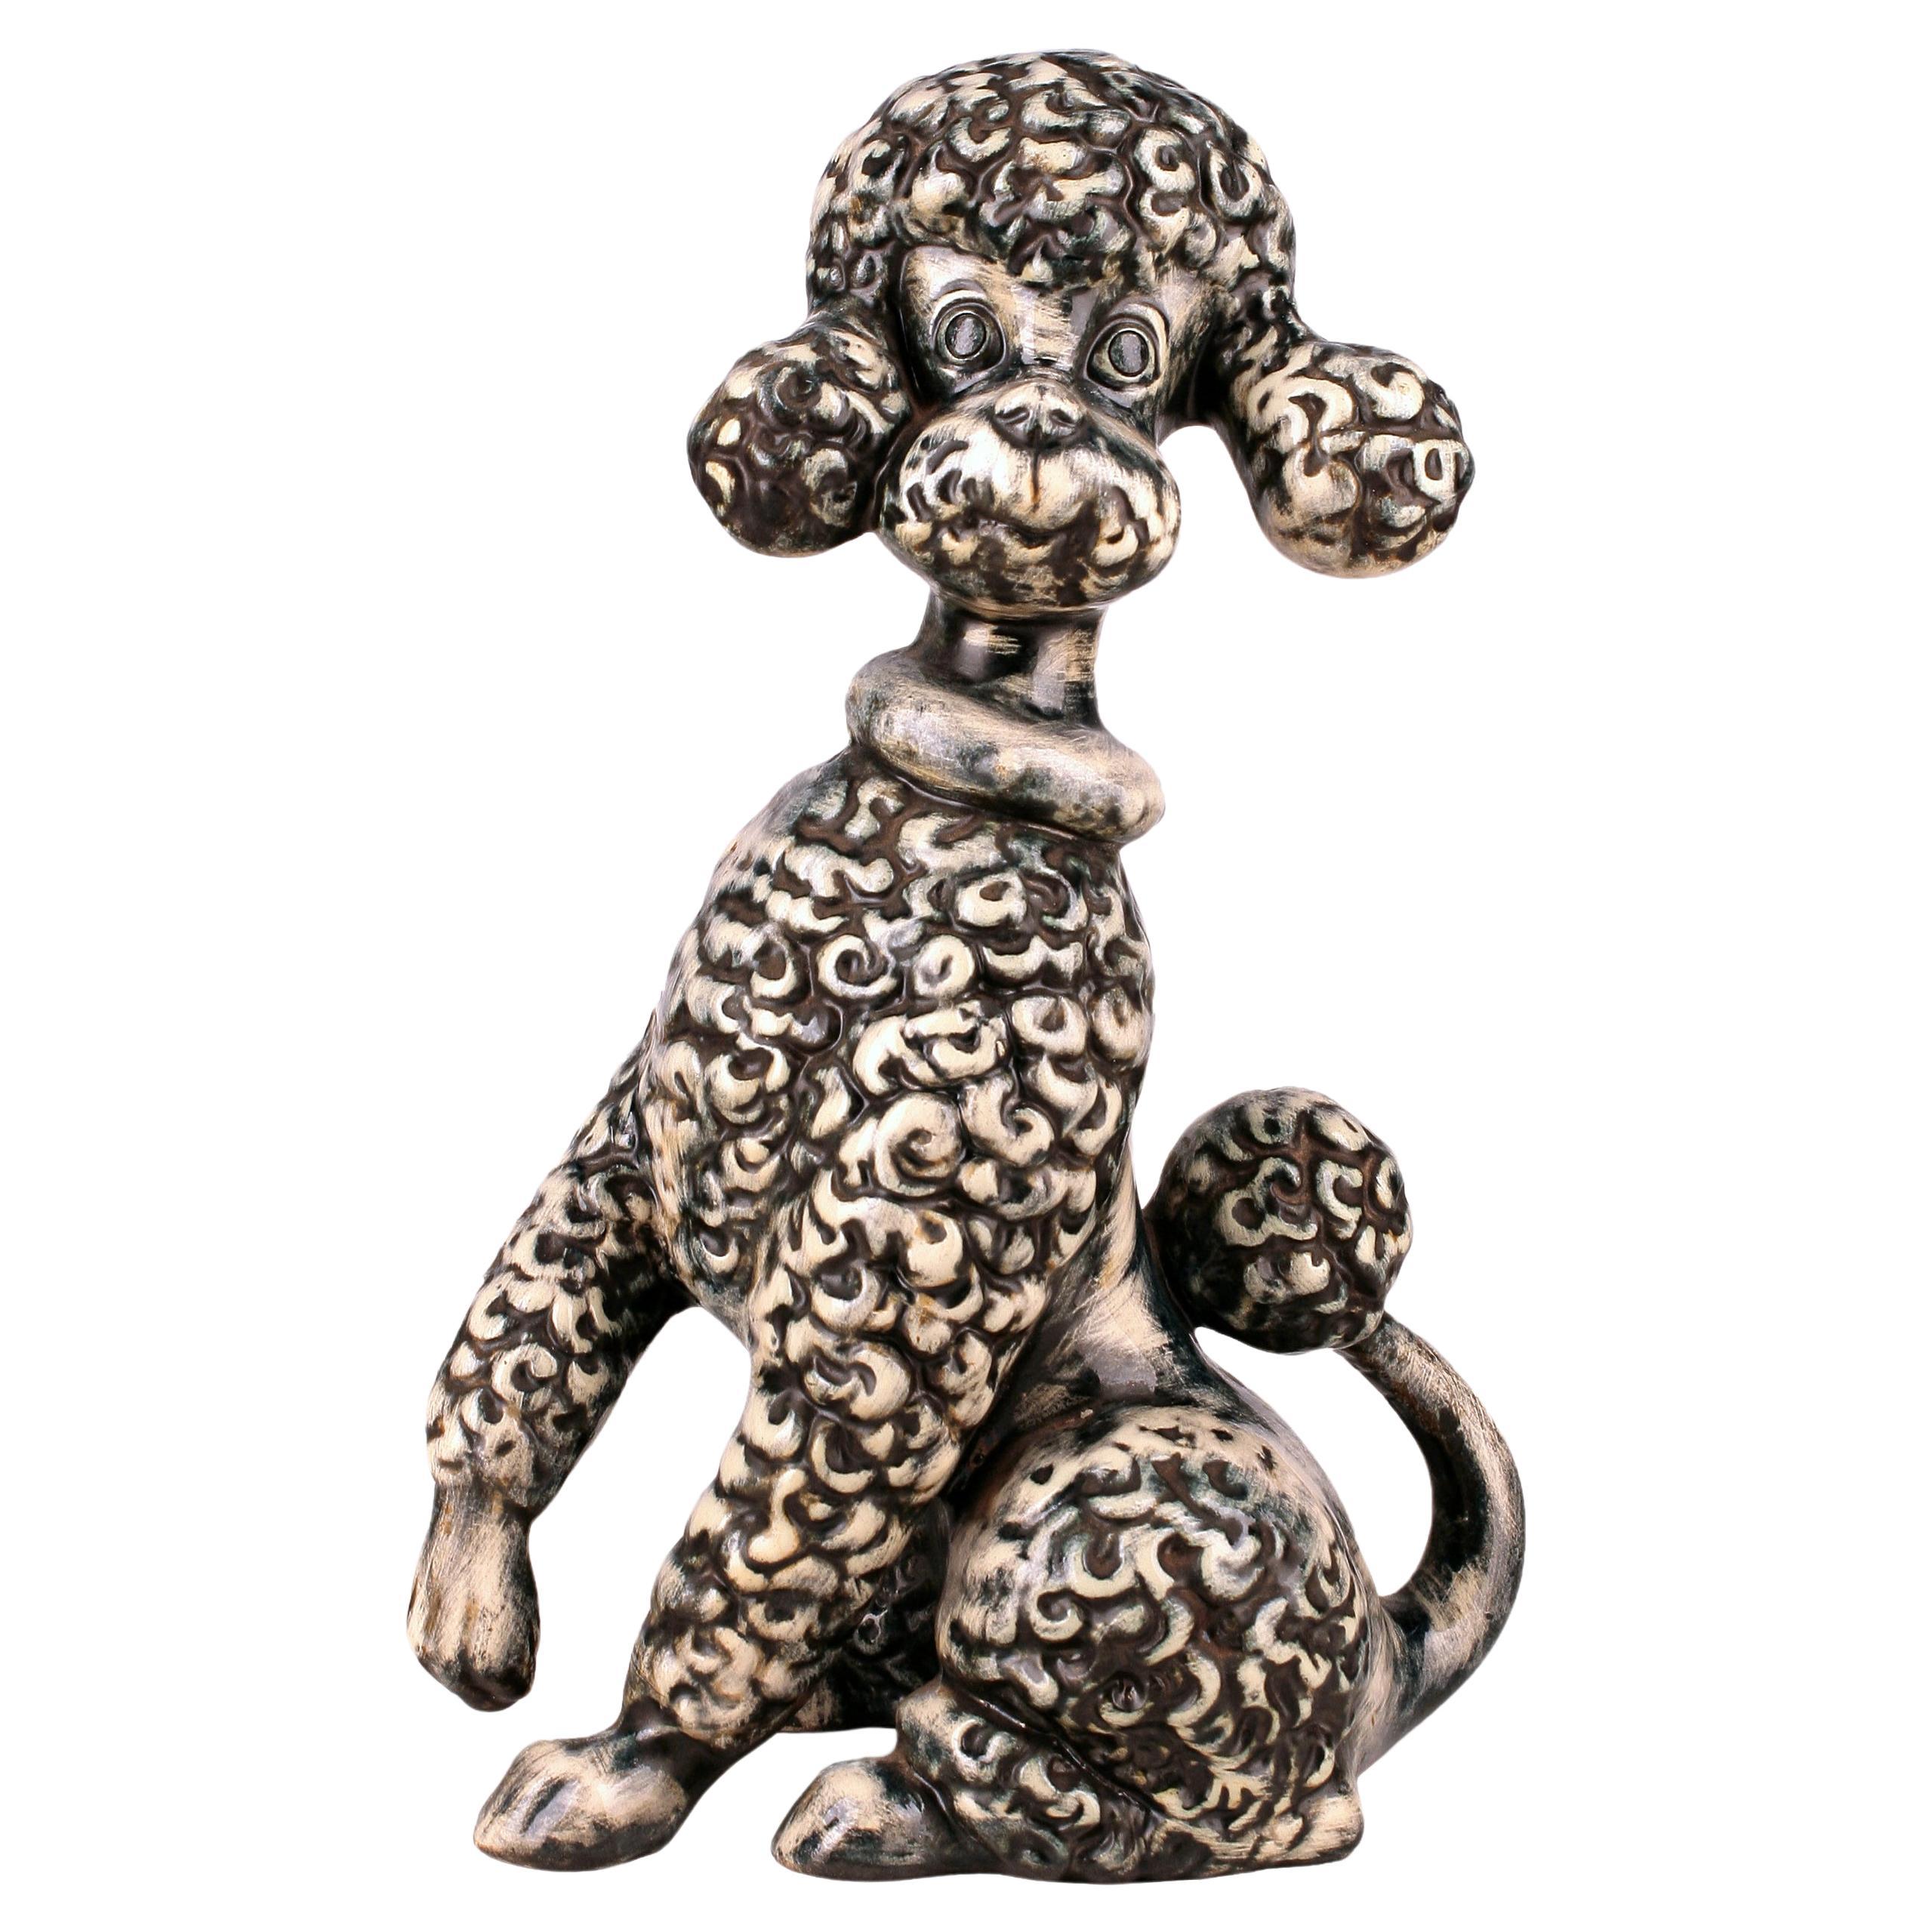 20th Century French Painted Ceramic Figure of a Poodle/Dog by Atelier Primavera For Sale